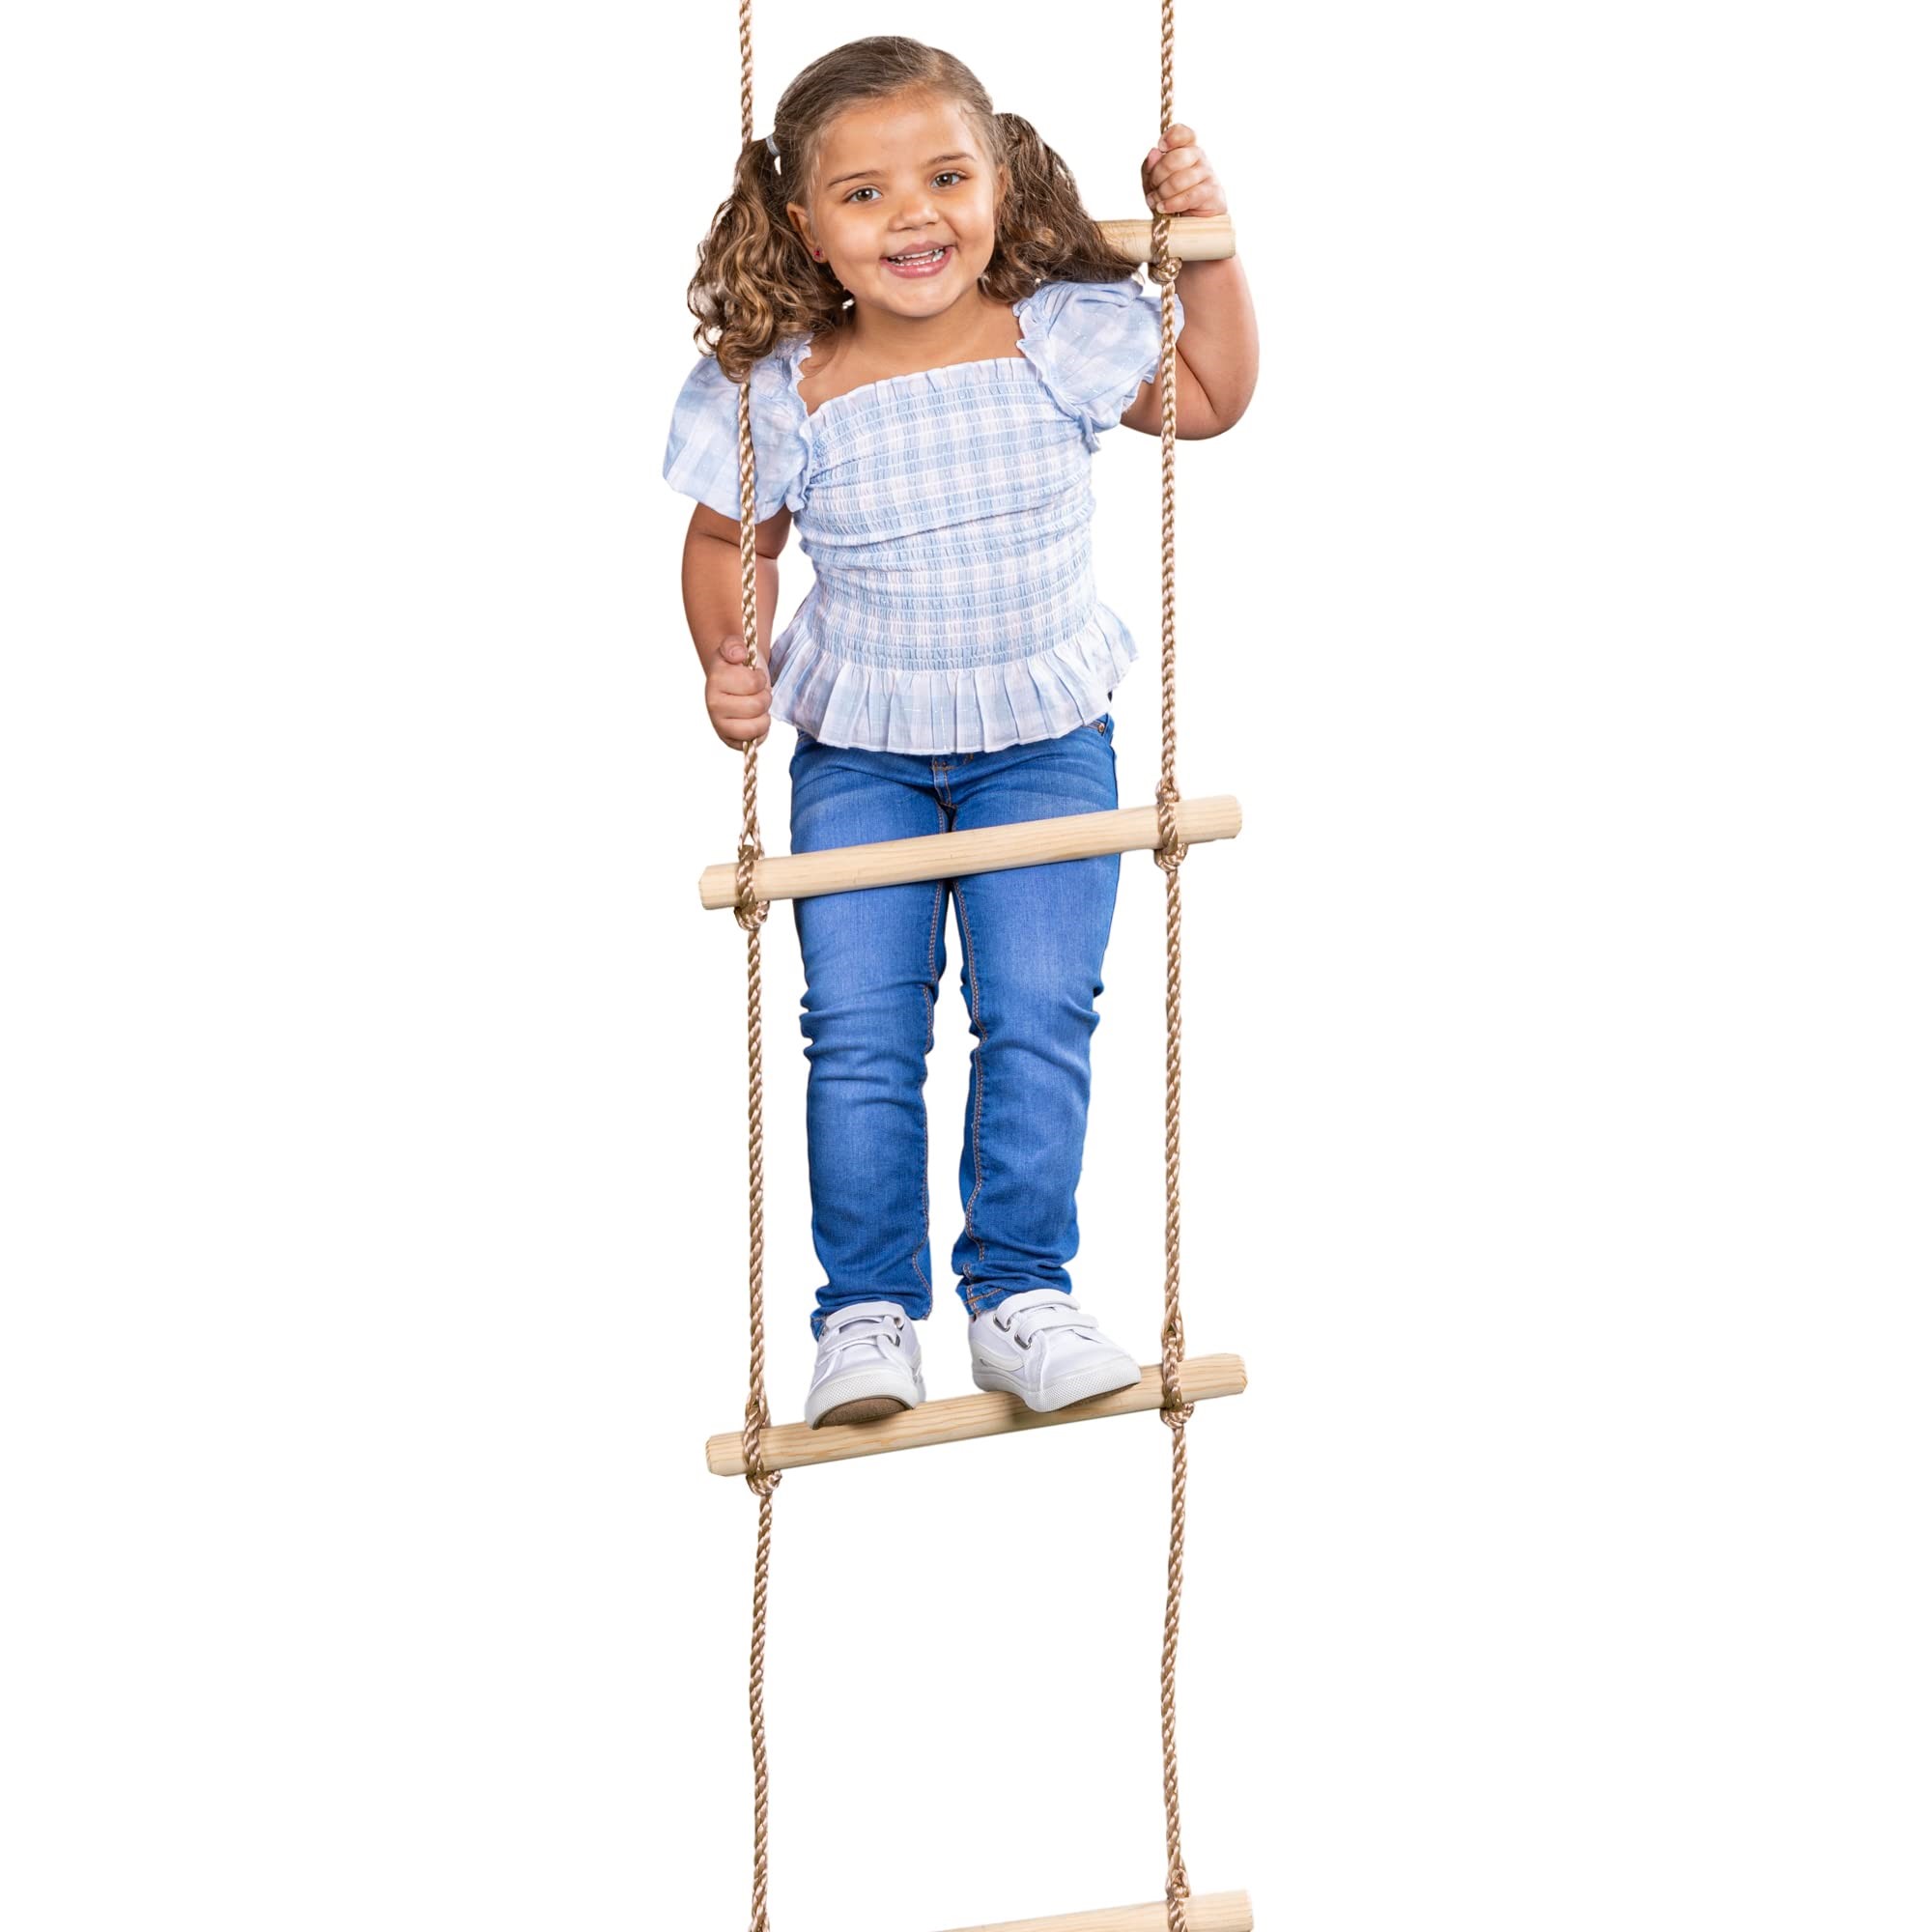 How To Climb Rope Ladder